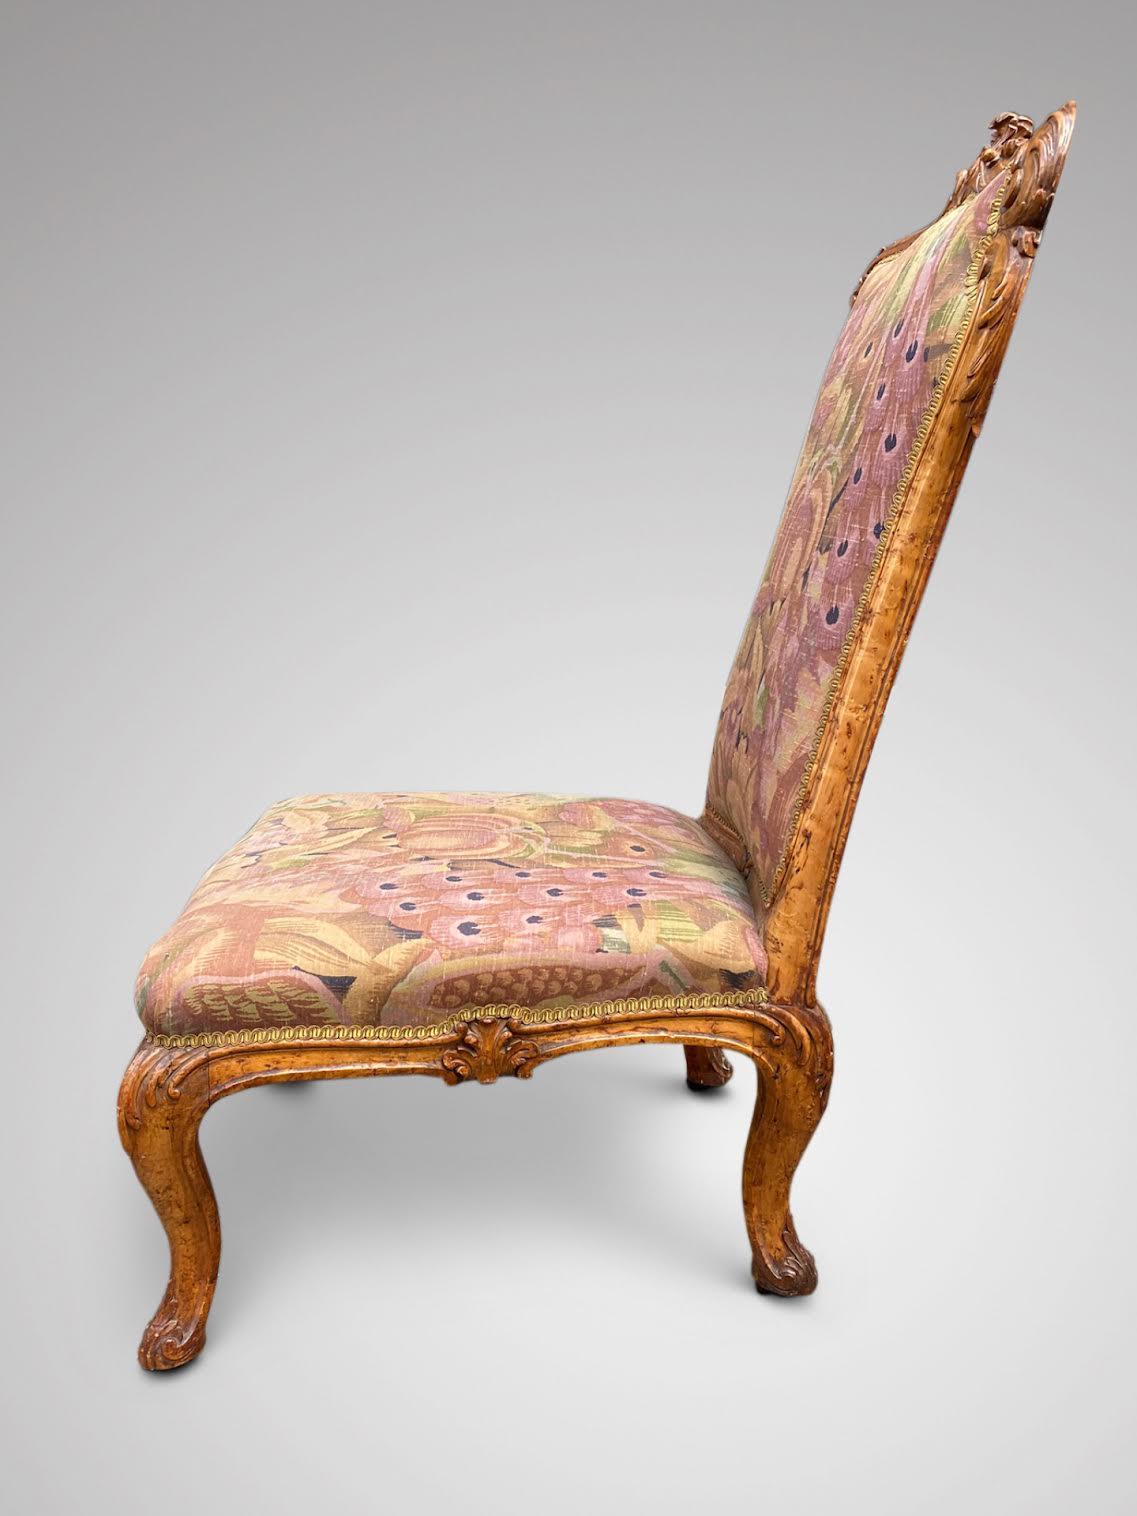 Early Victorian Stunning Mid 19th Century Burr Elm Nursing Chair For Sale